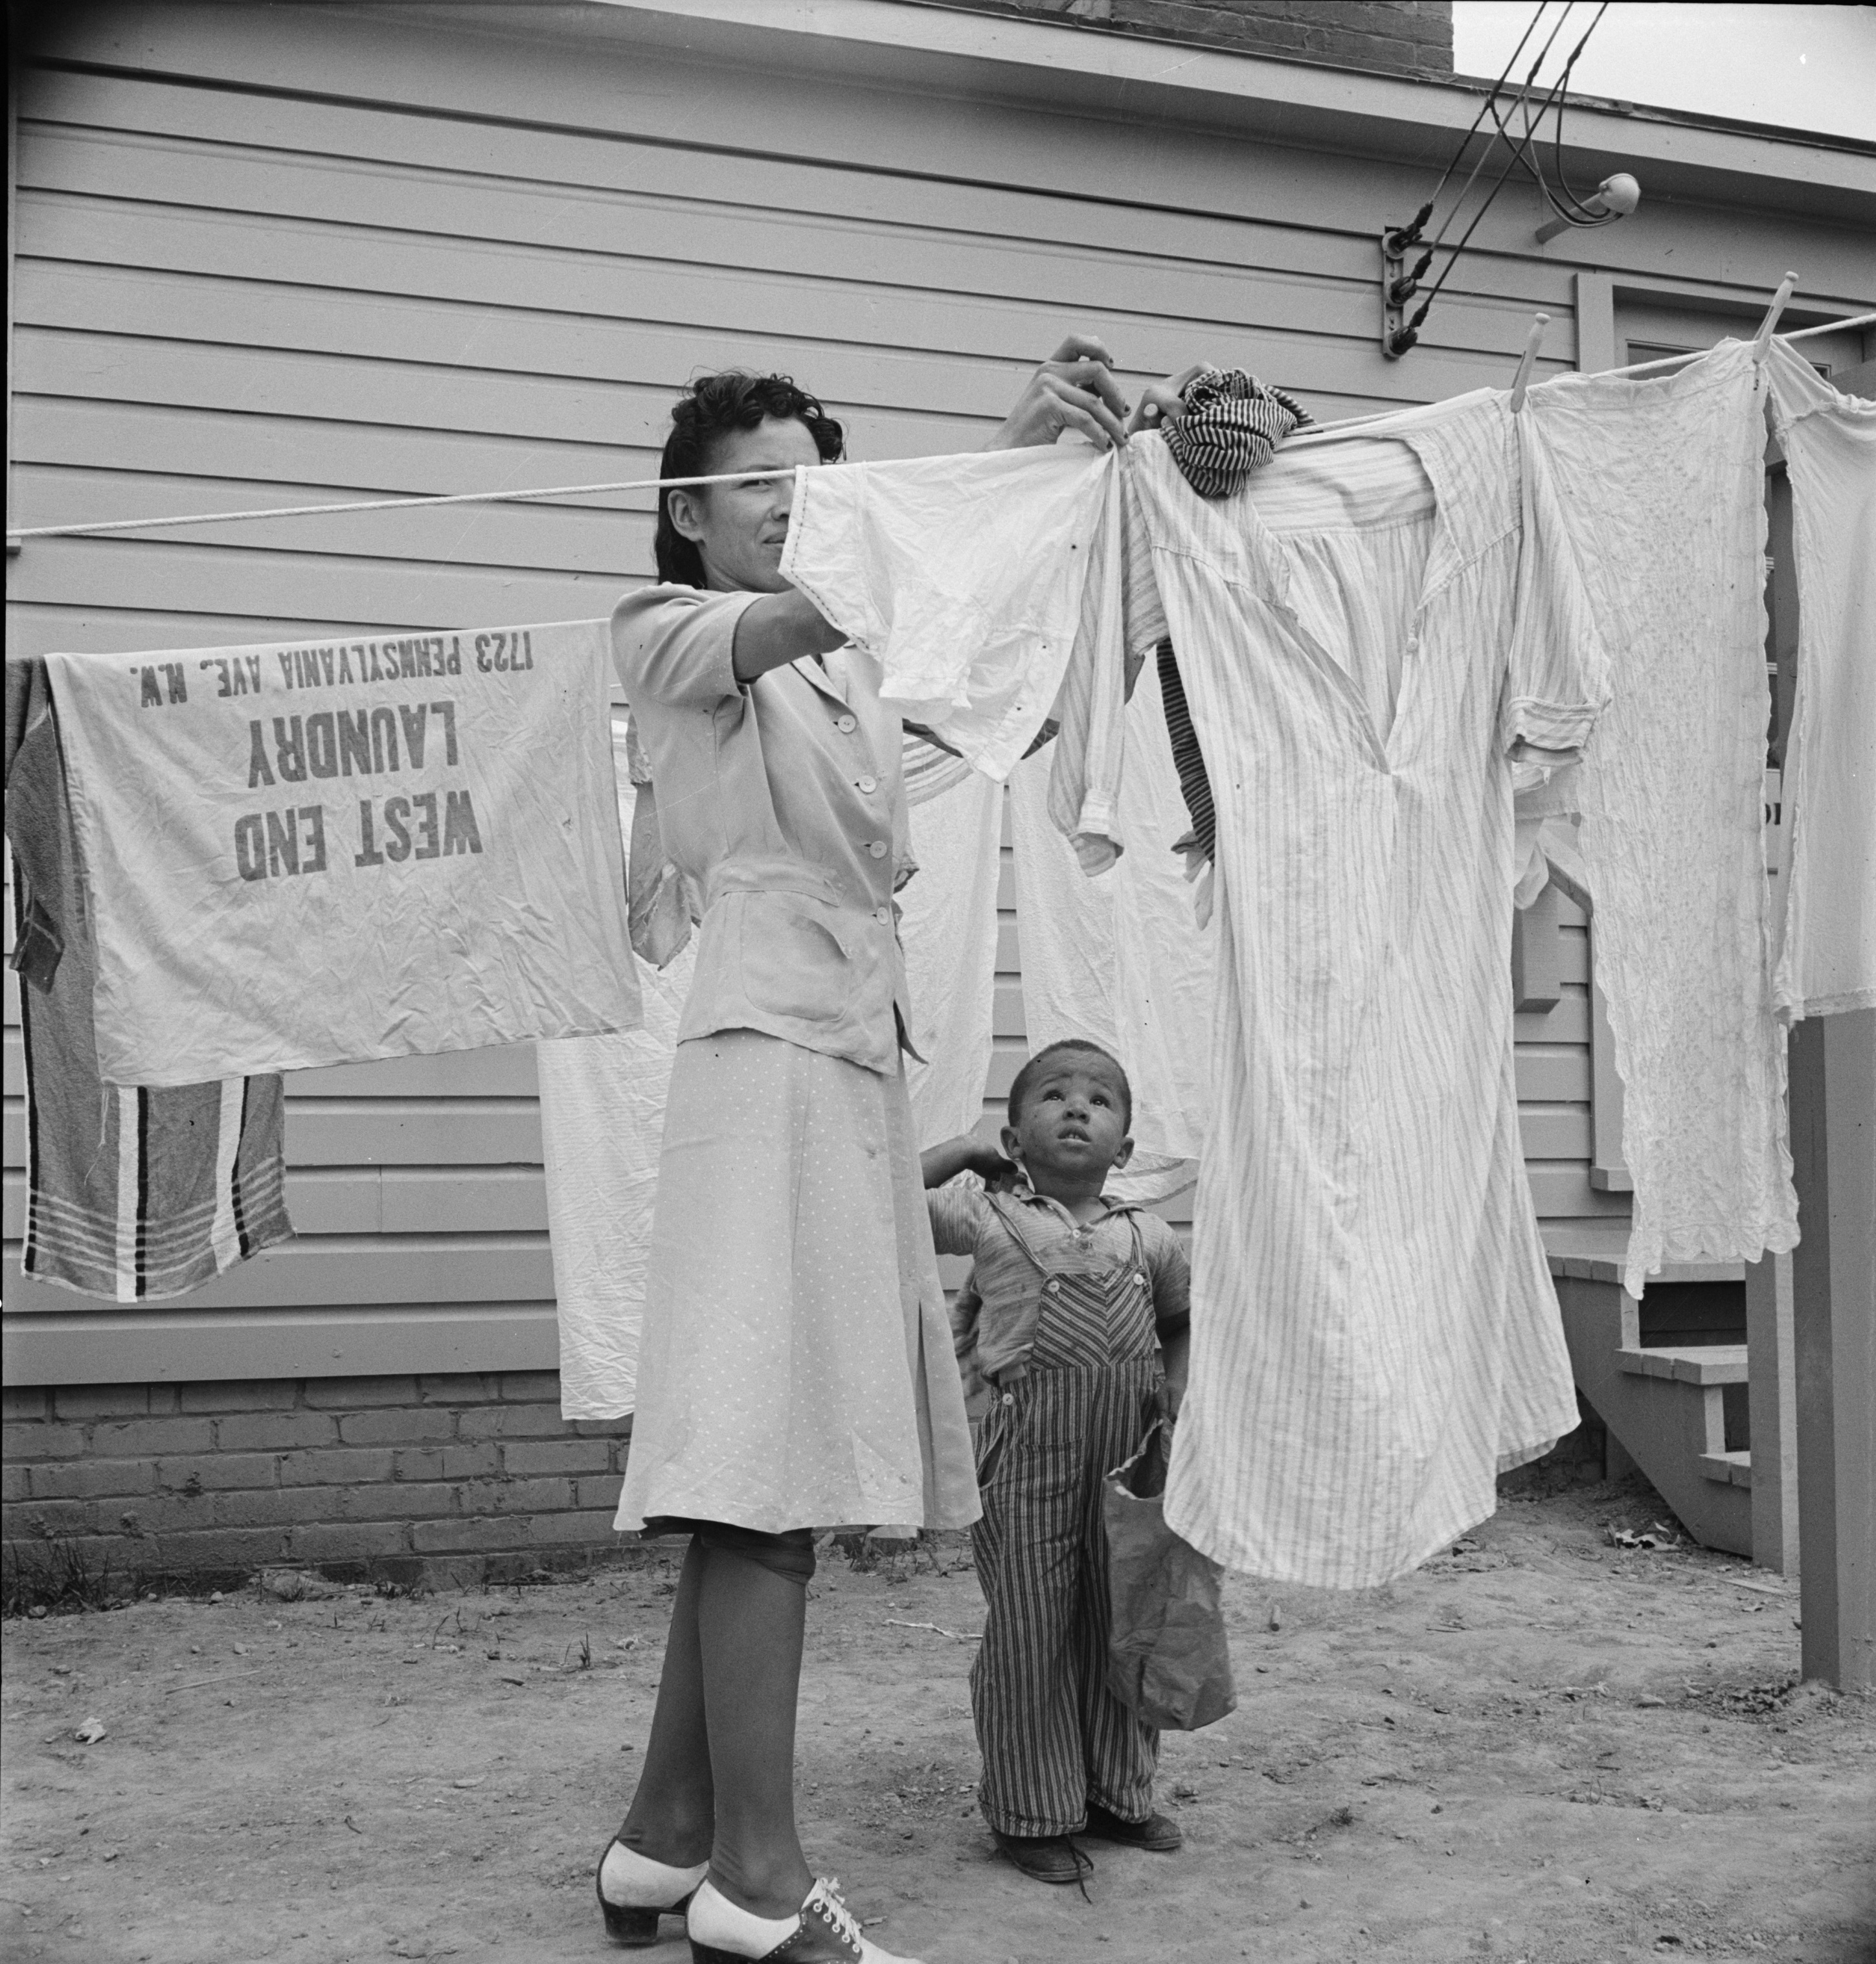 A woman hanging out washing with her young son in front of the community building in a FSA (Farm Security Administration) housing relief camp for African Americans. Arlington, Virginia, 1942. Source: Library of Congress.